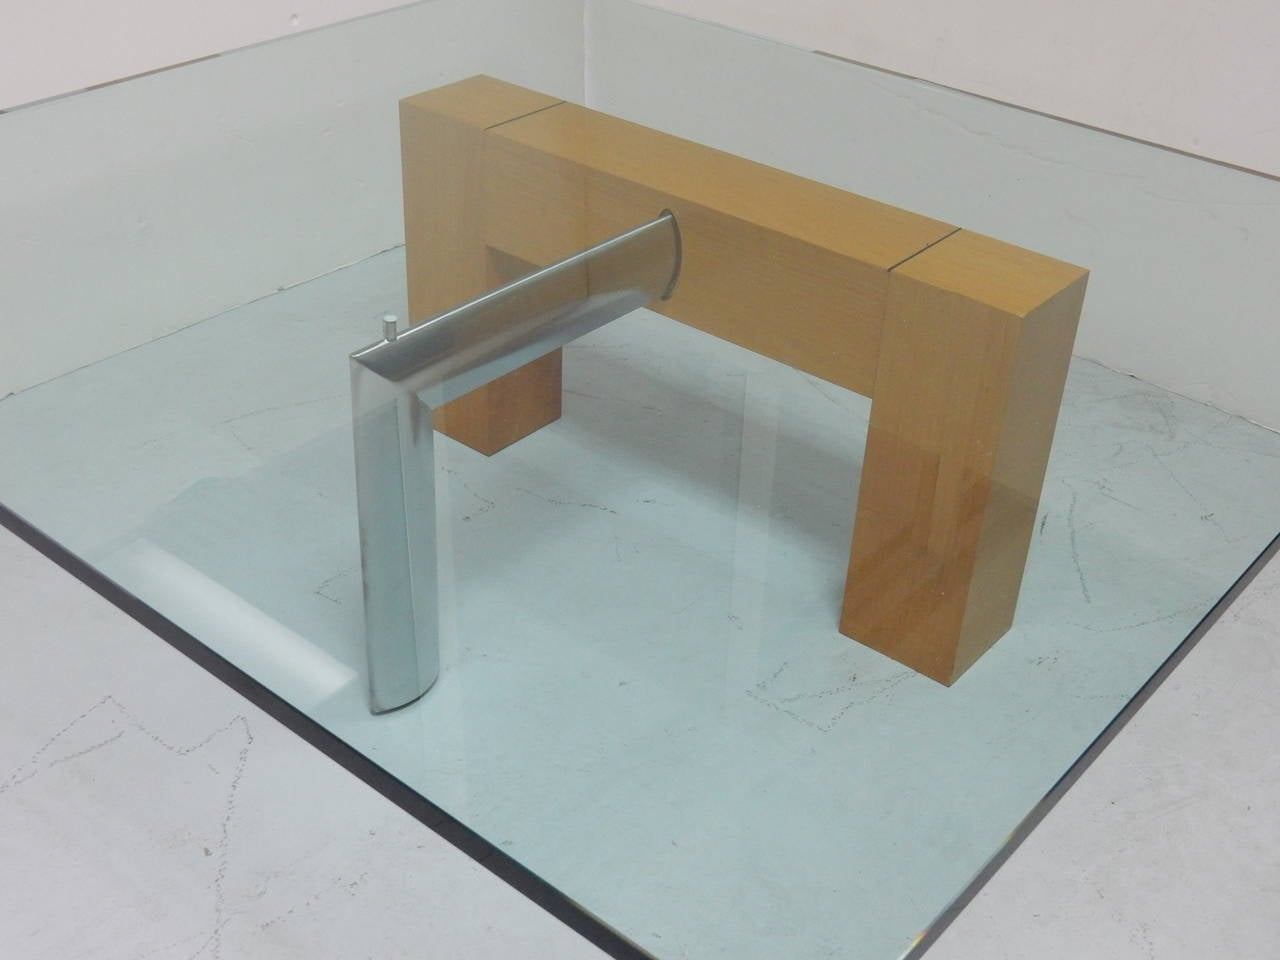 Coffee table by Daniela Puppa for Fontana Arte. Simple design yet robust and visually dynamic. Perfect balance of wood, glass and metal. Glass top is signed on corner.